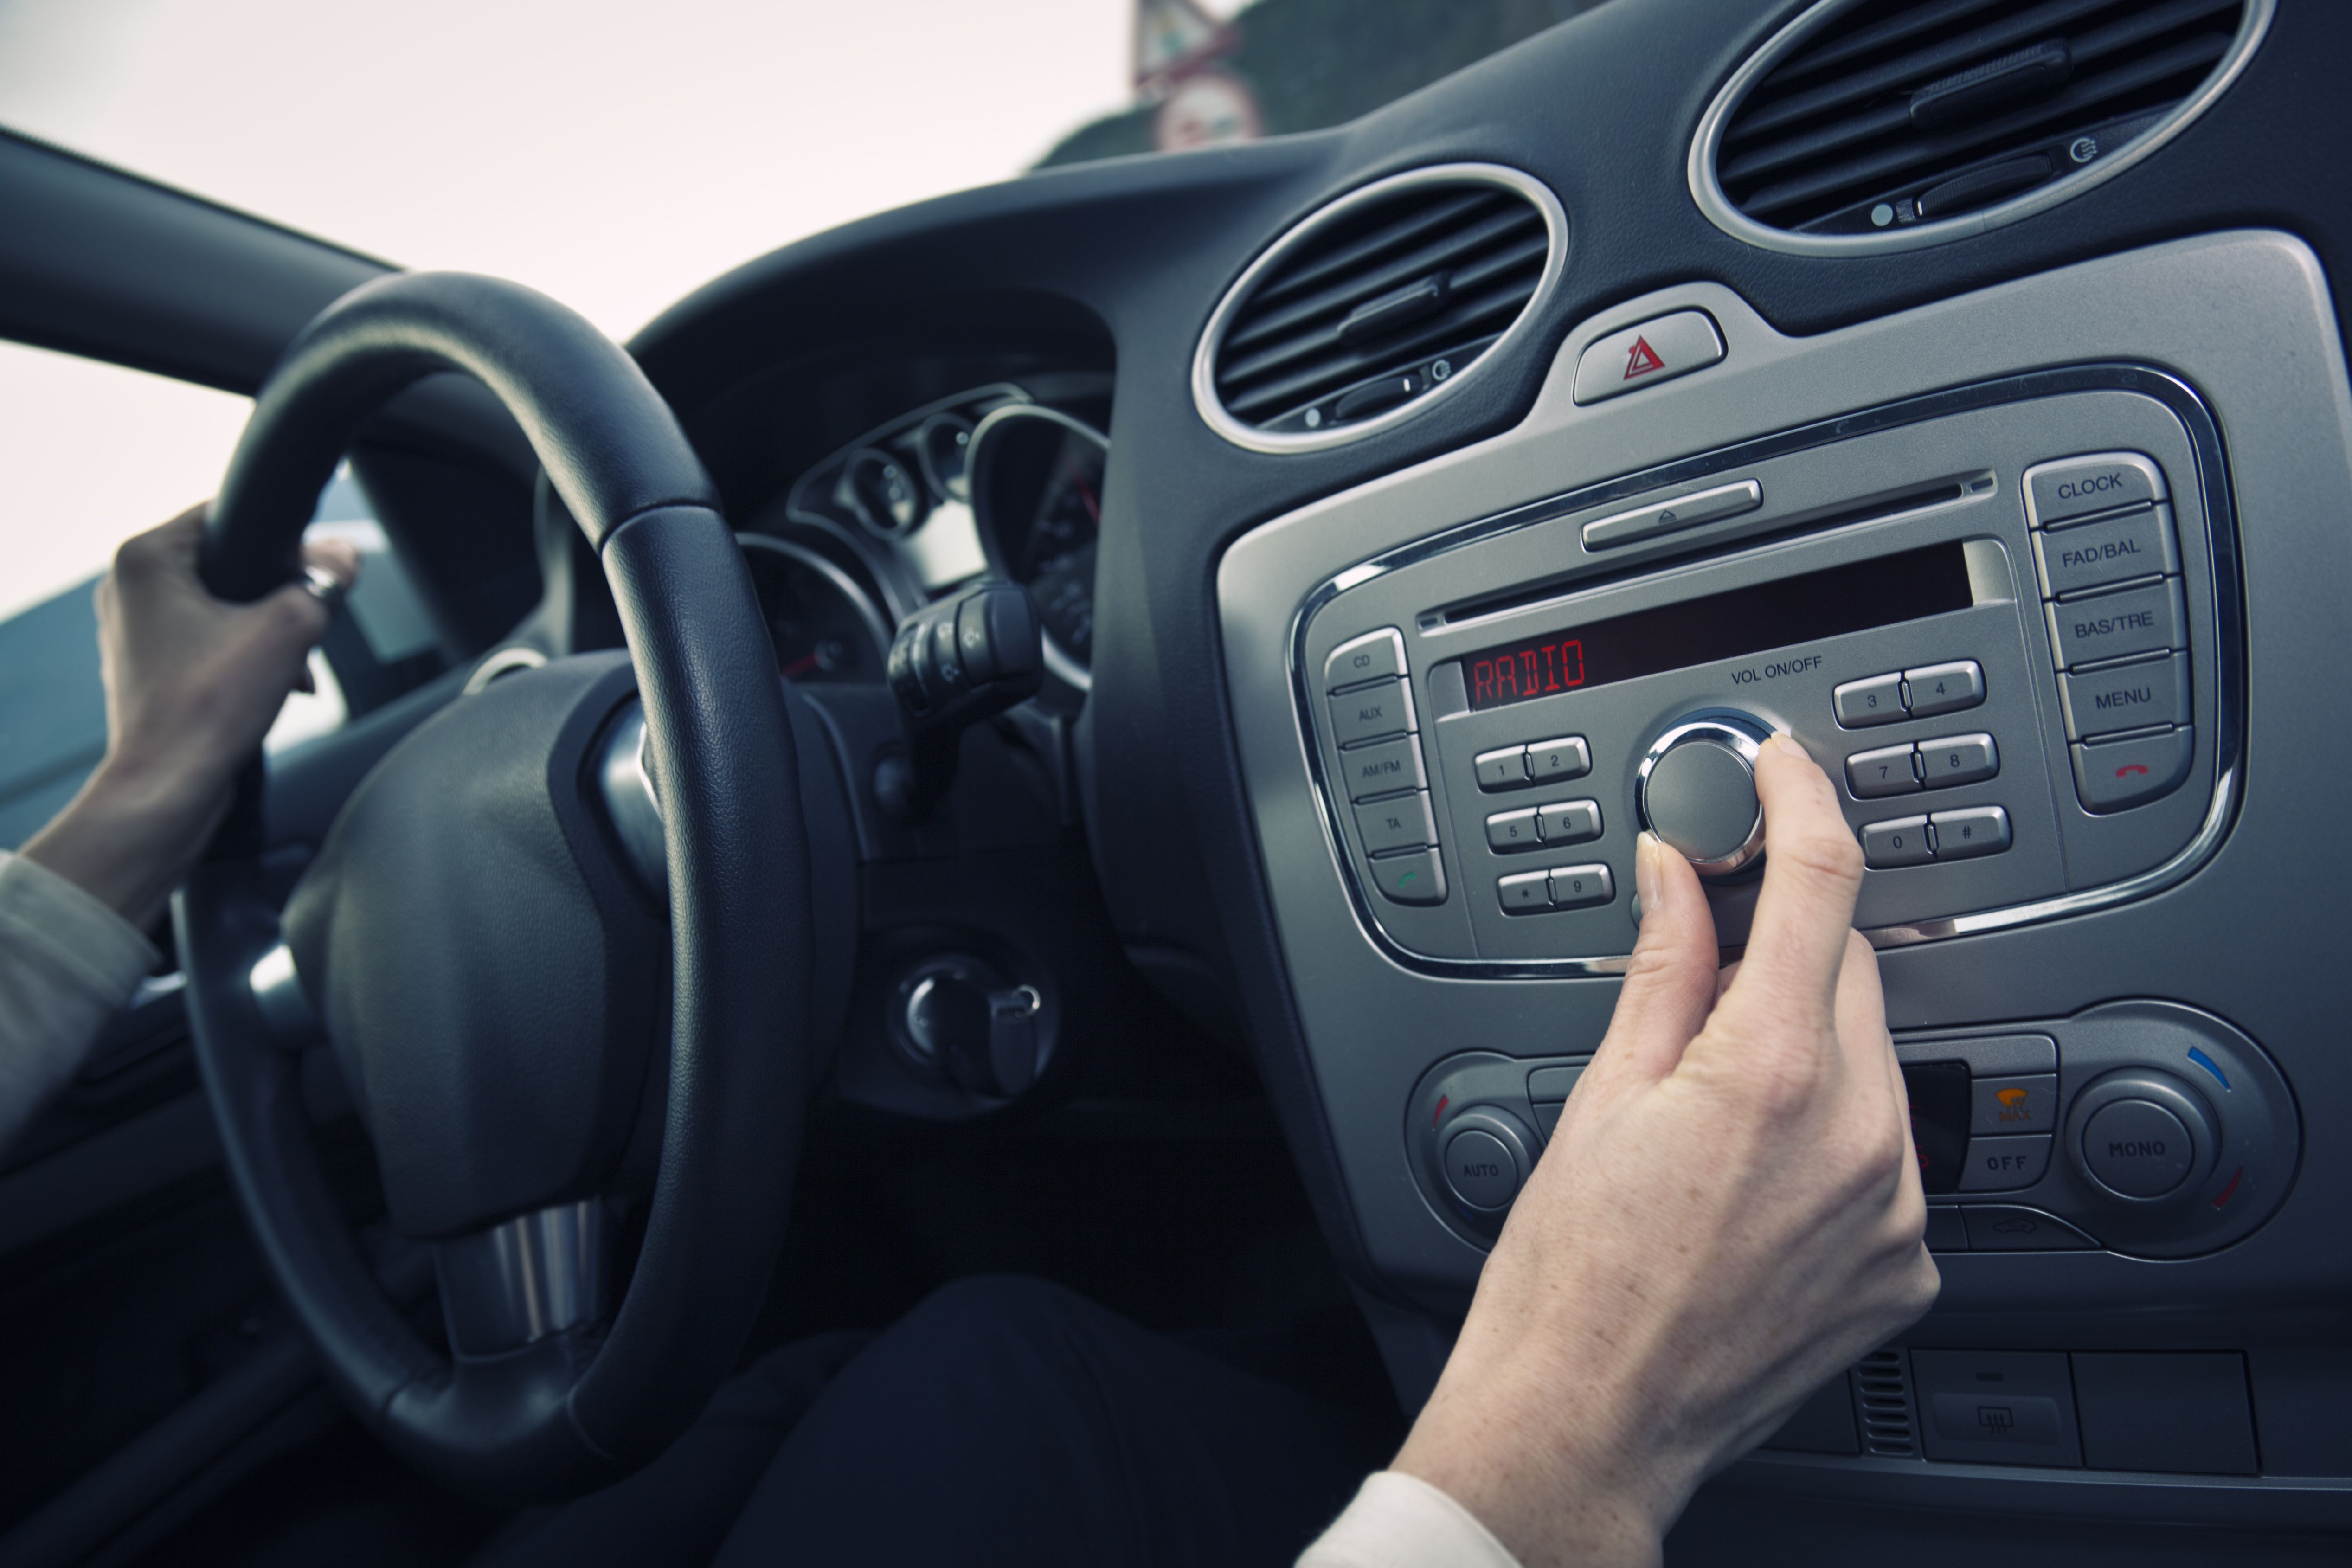 Woman Turning Up The Volume On The Car Radio Stock Photo